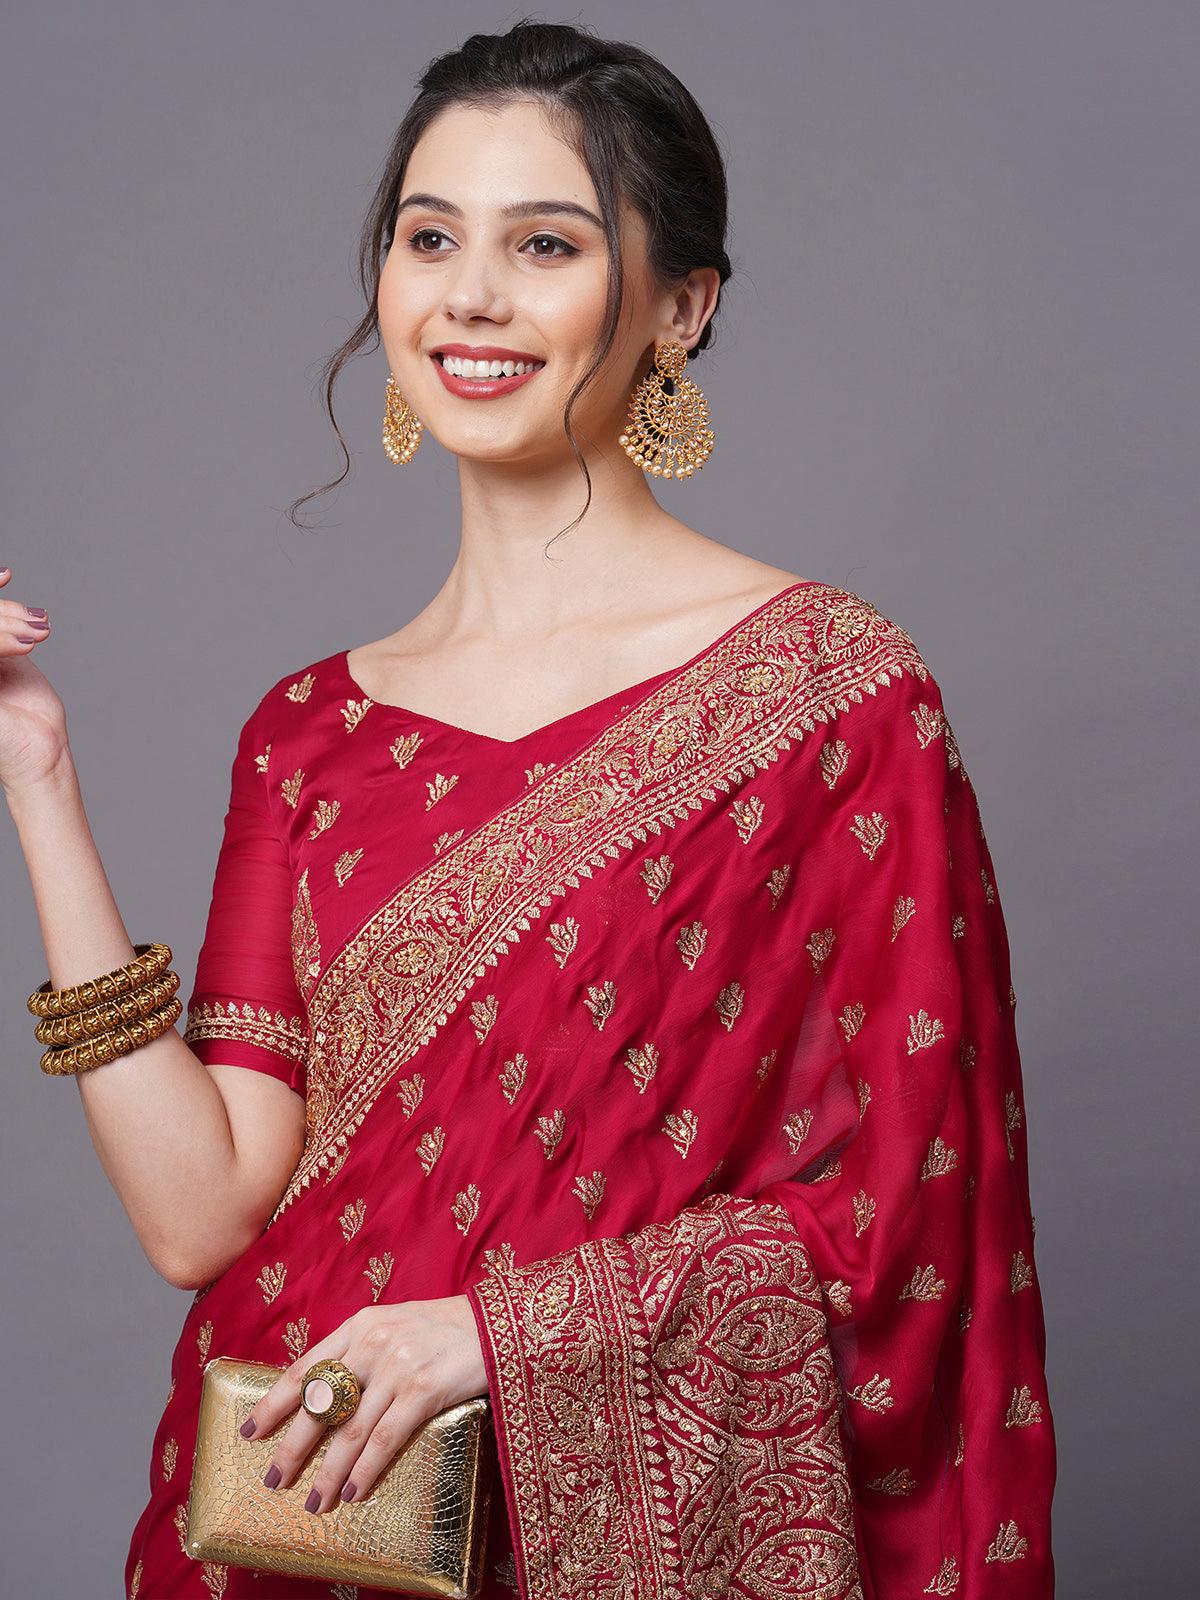 Women's Red Party Wear Satin Chiffon Embellished Saree With Unstitched Blouse - Odette